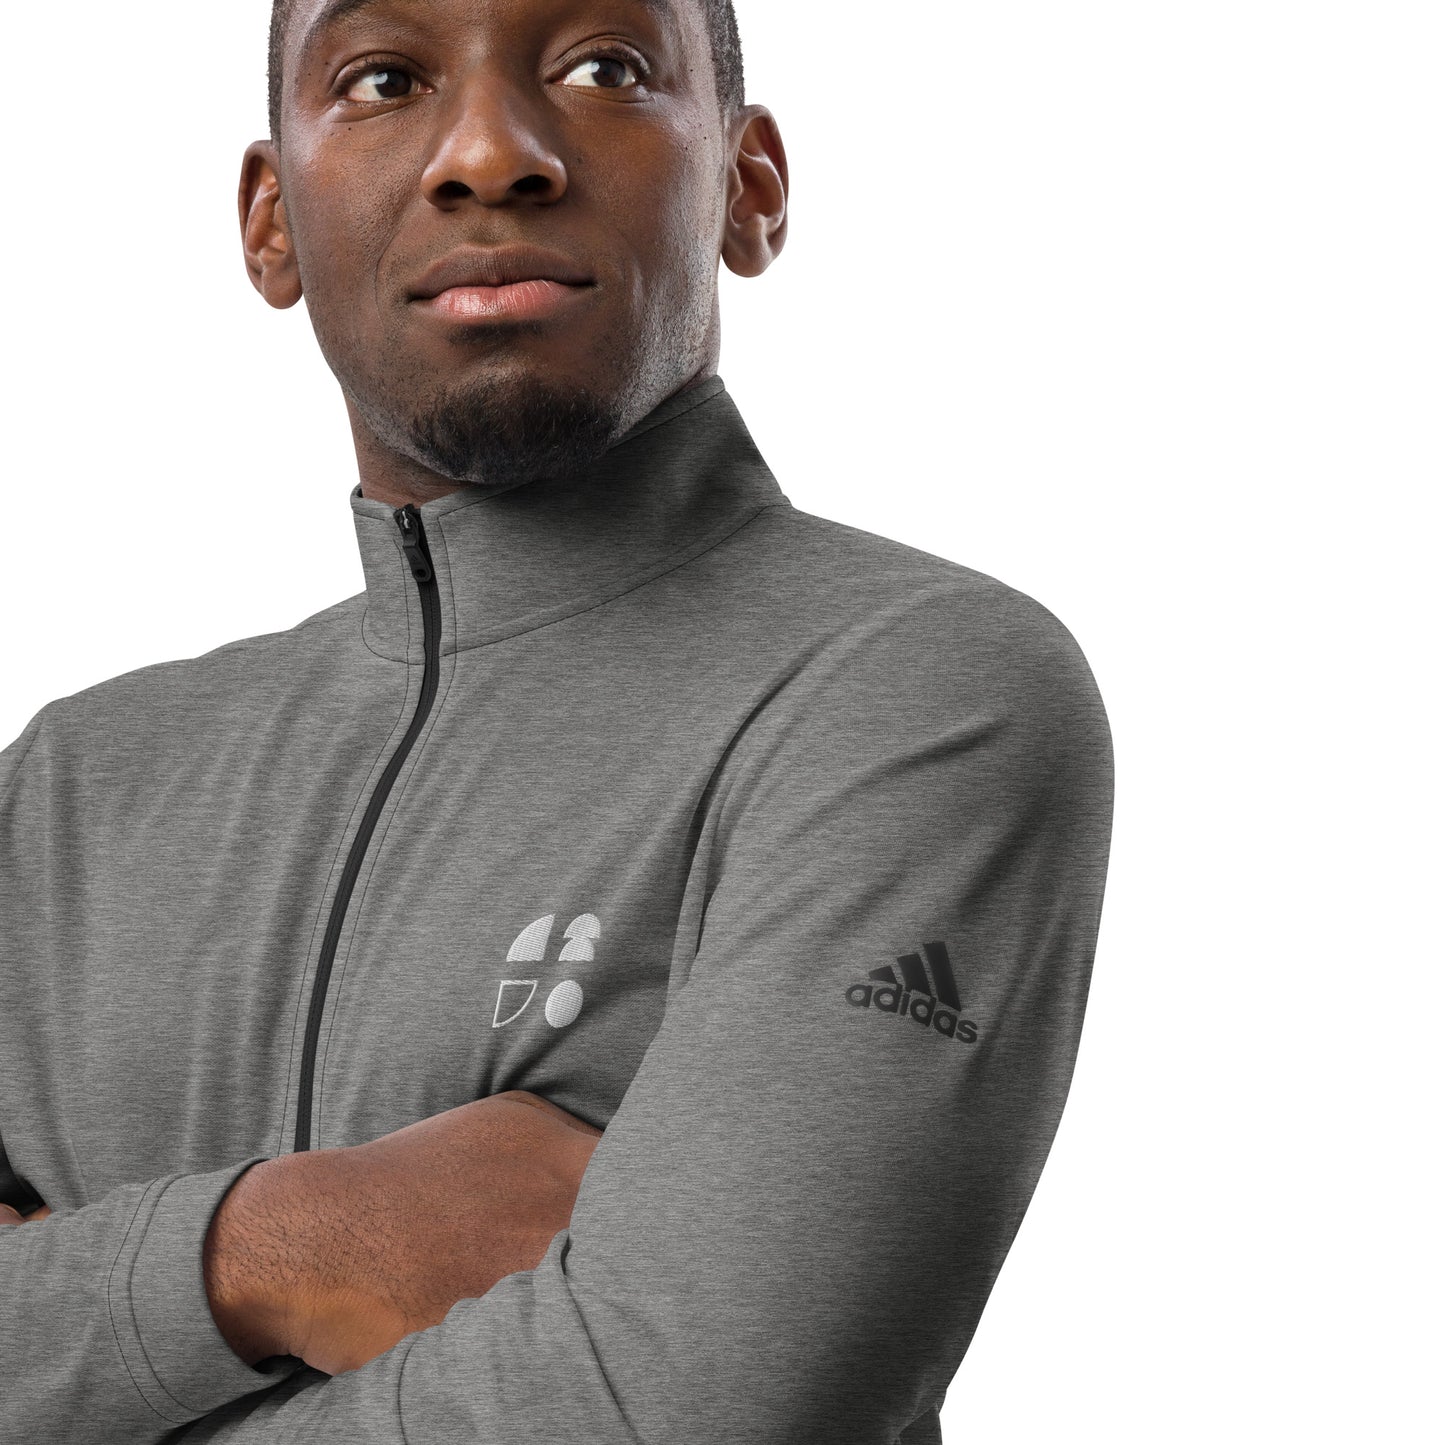 The 'Fast Load" Quarter Zip Pullover